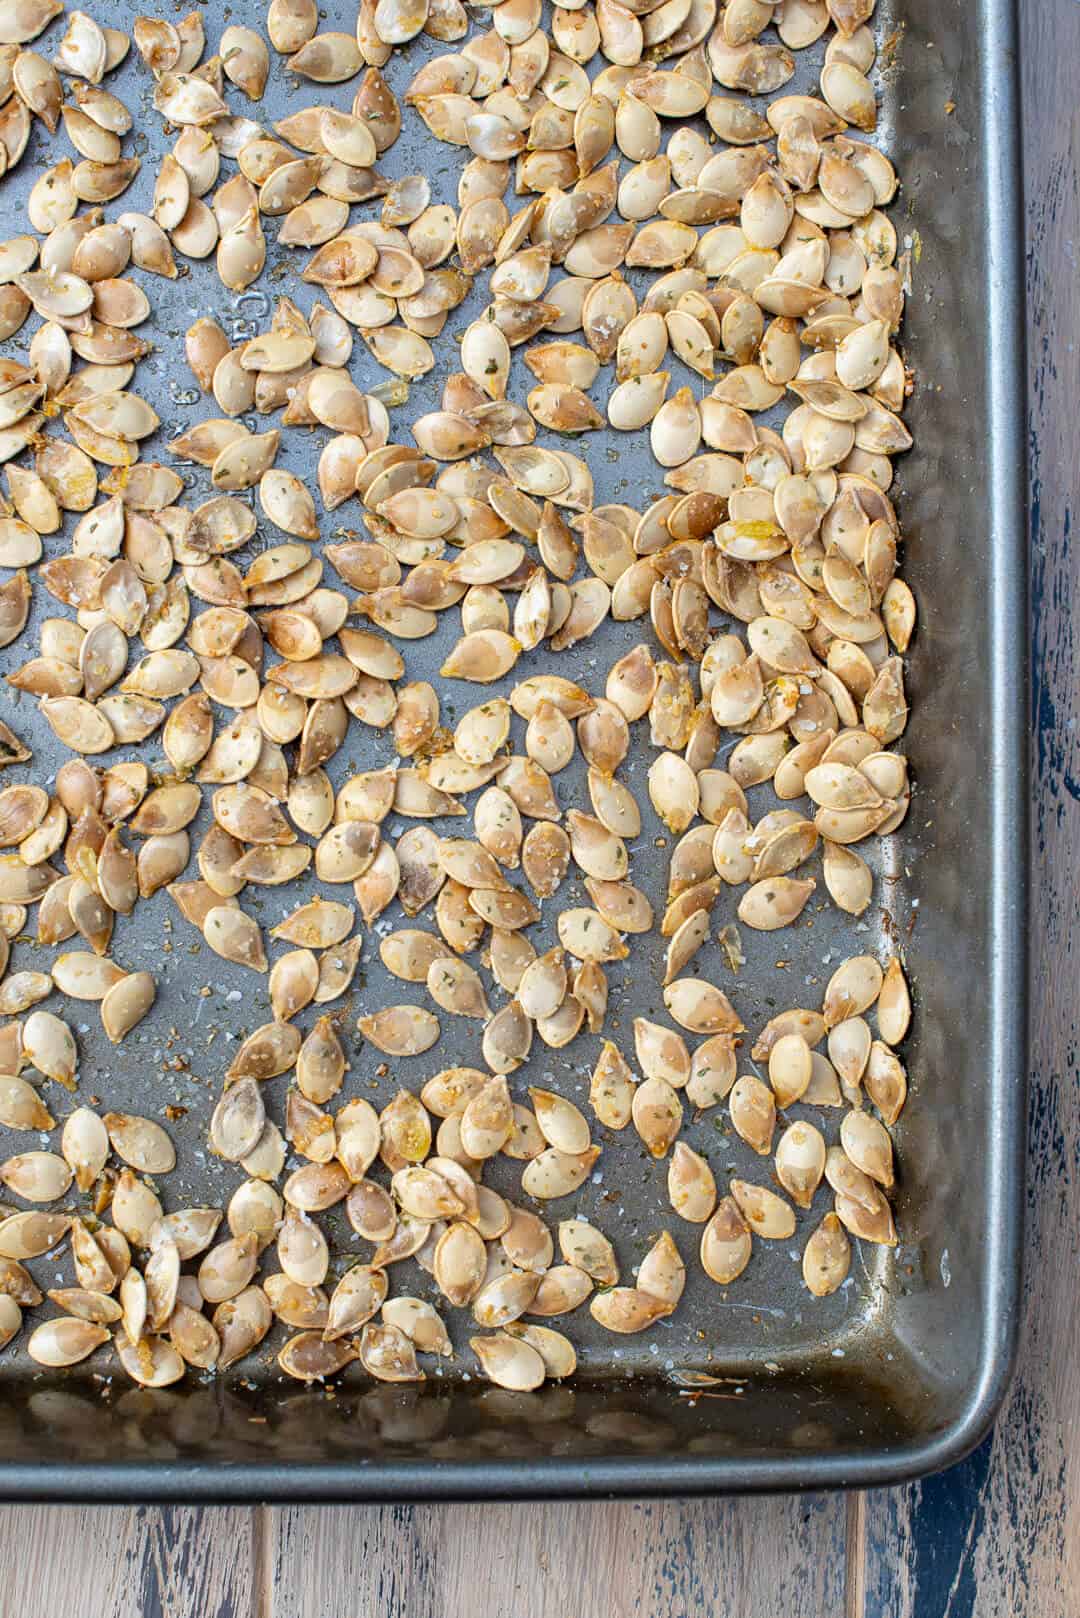 An over the top shot of Roasted Acorn Squash seeds on a metal baking sheet.